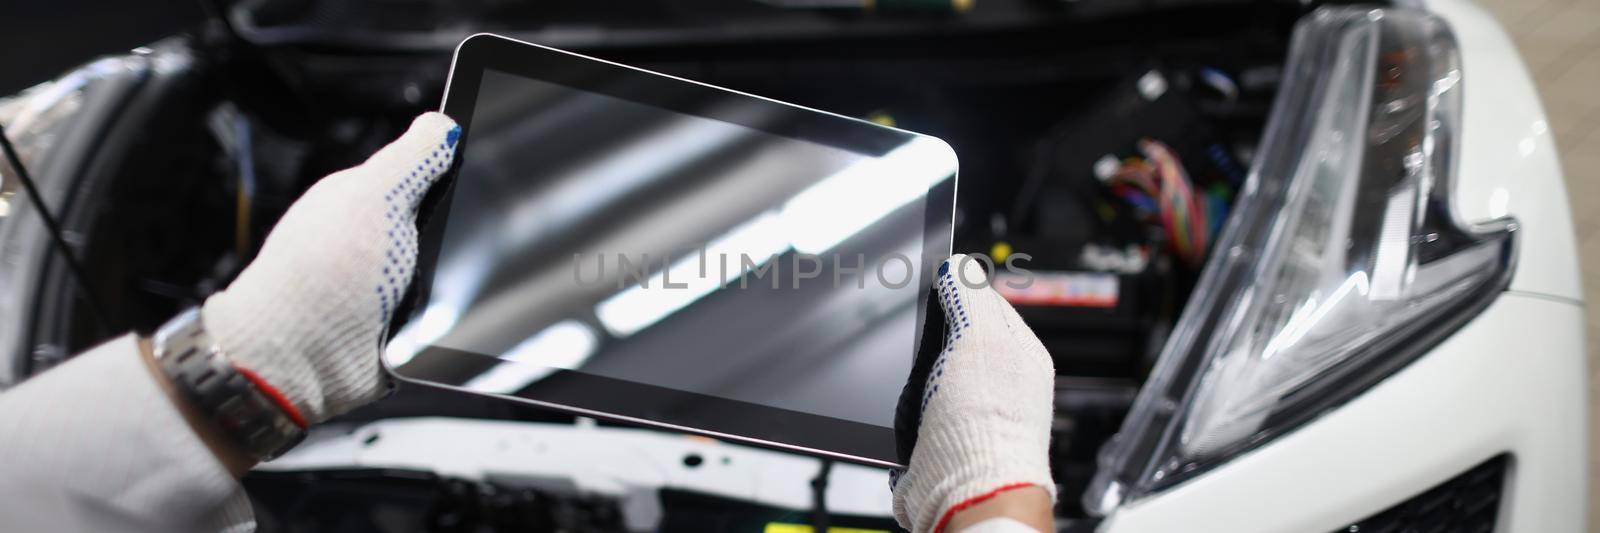 Close-up of mechanic use tablet device with black screen in front of car. Handyman using digital tablet at work in car service. Maintenance, mockup concept